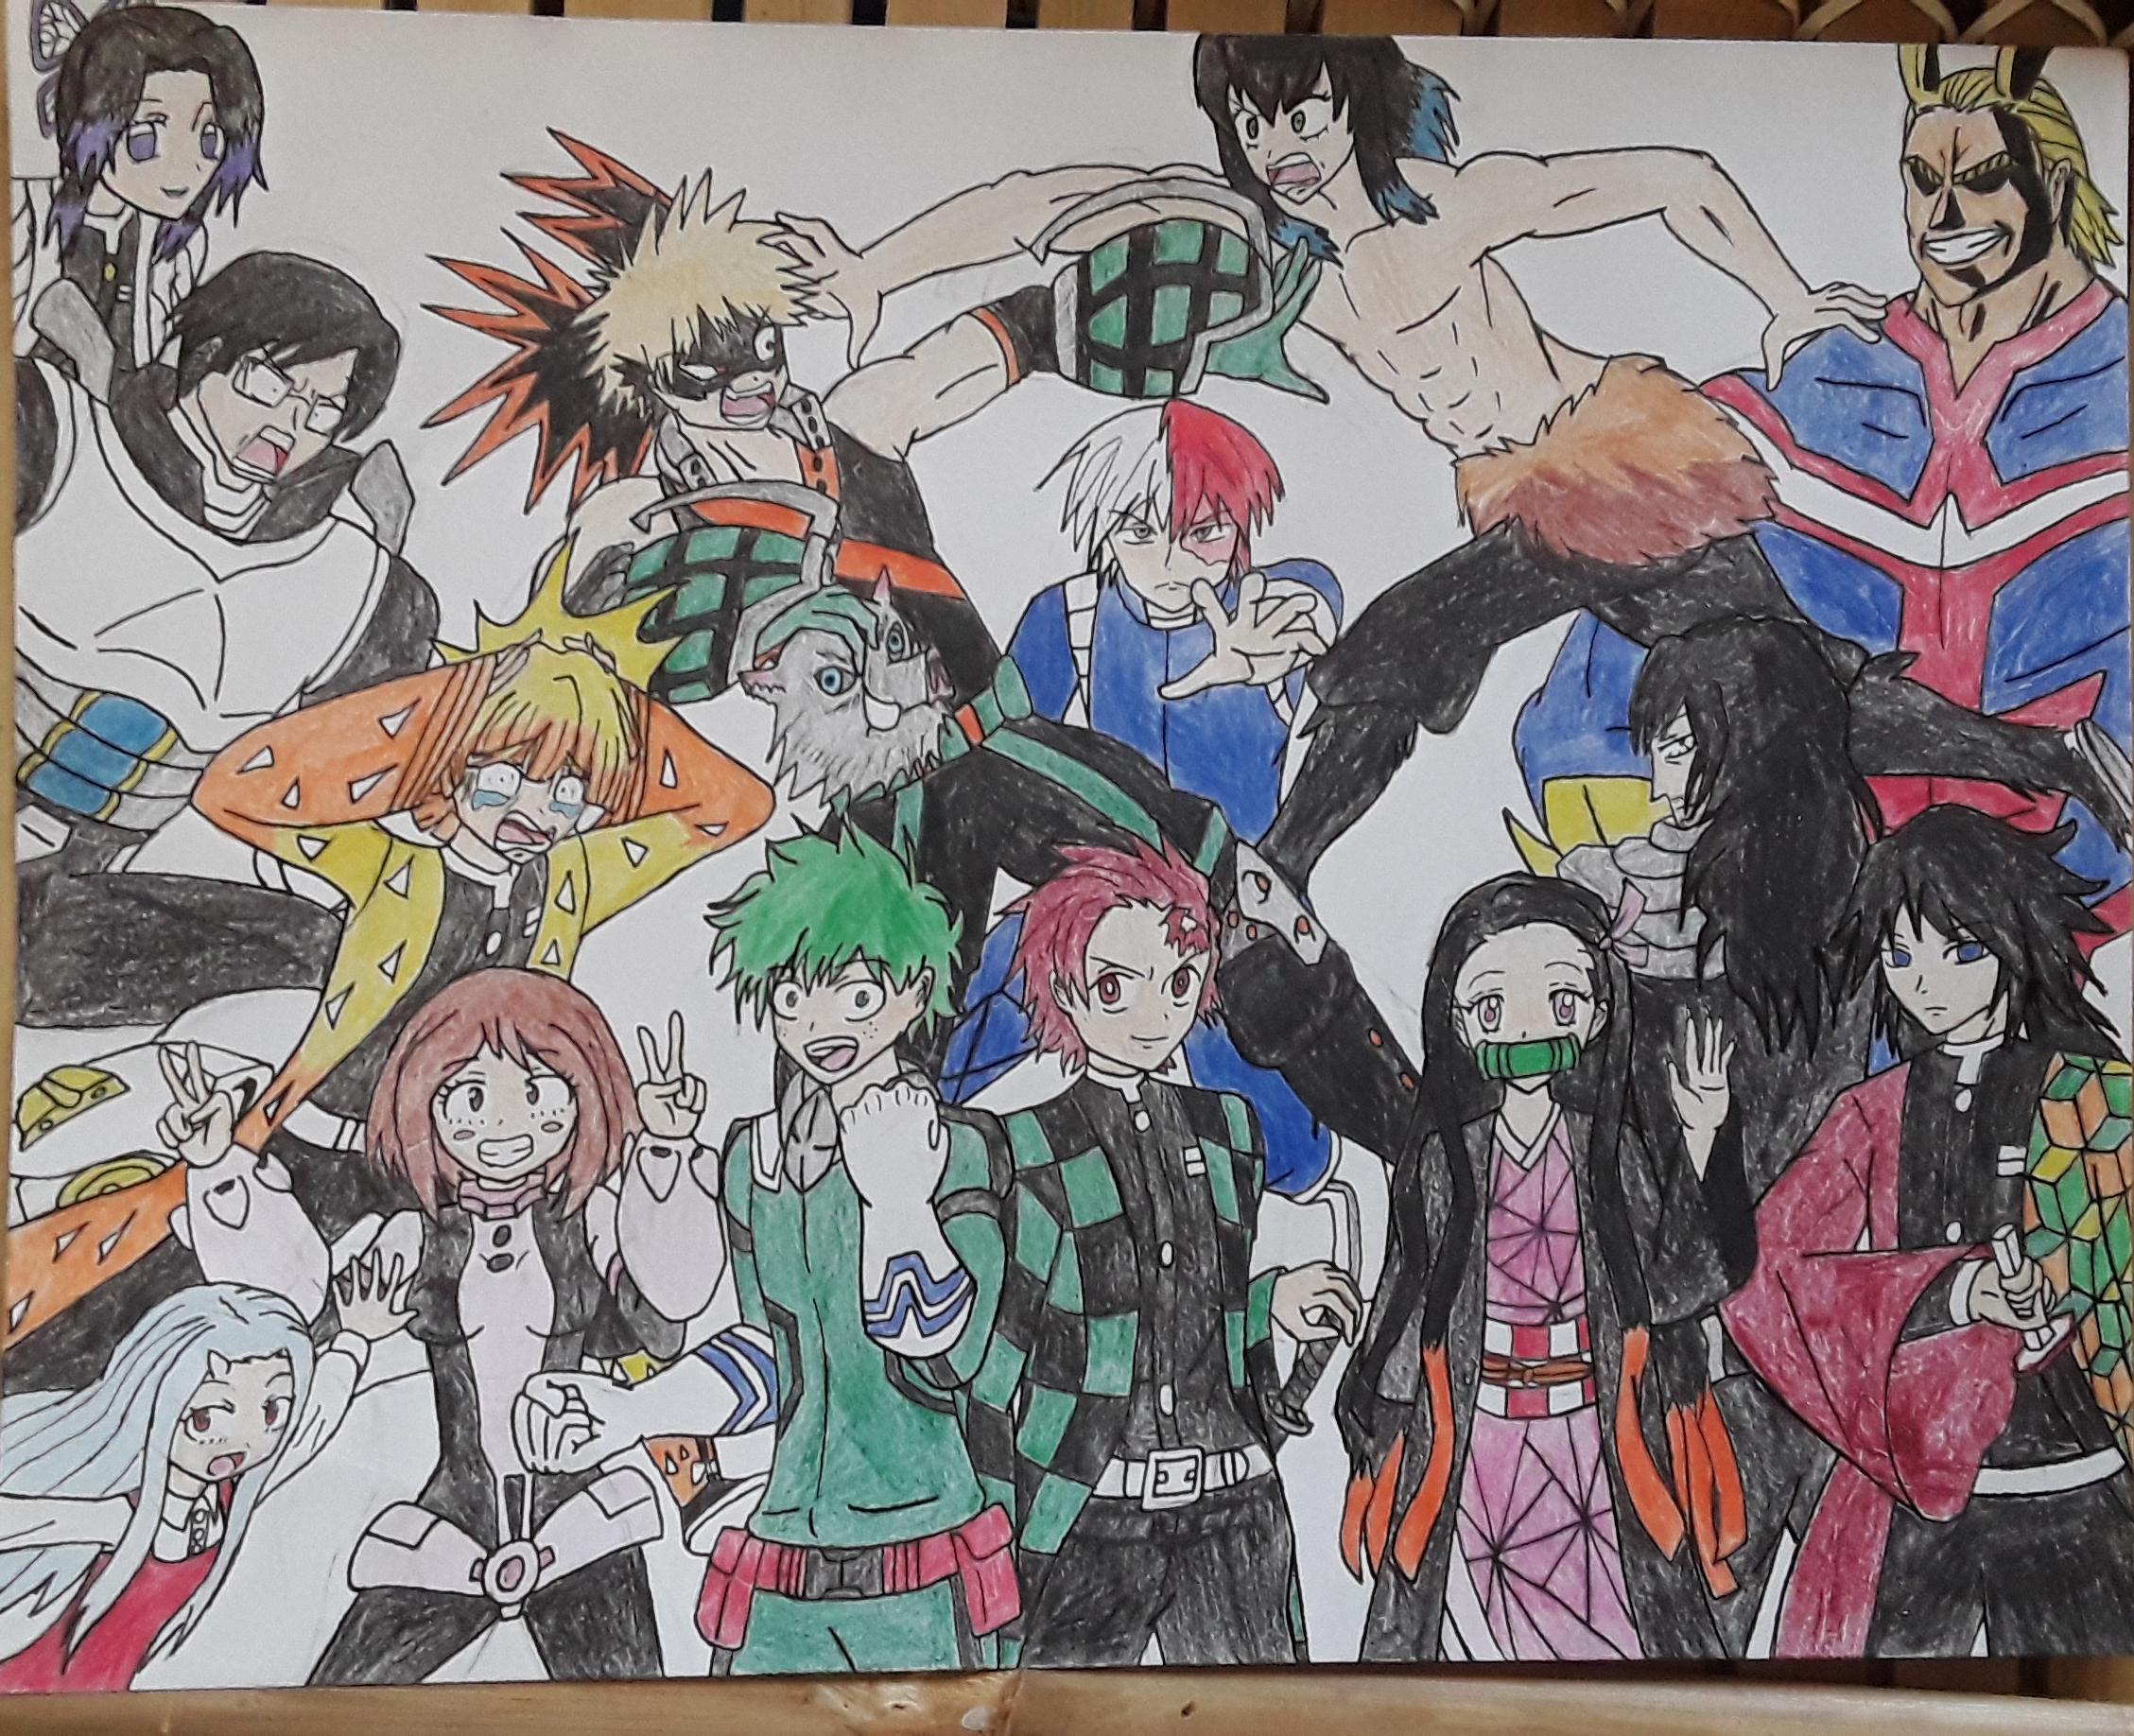 My Artwork of MHA and Demon Slayer Crossover